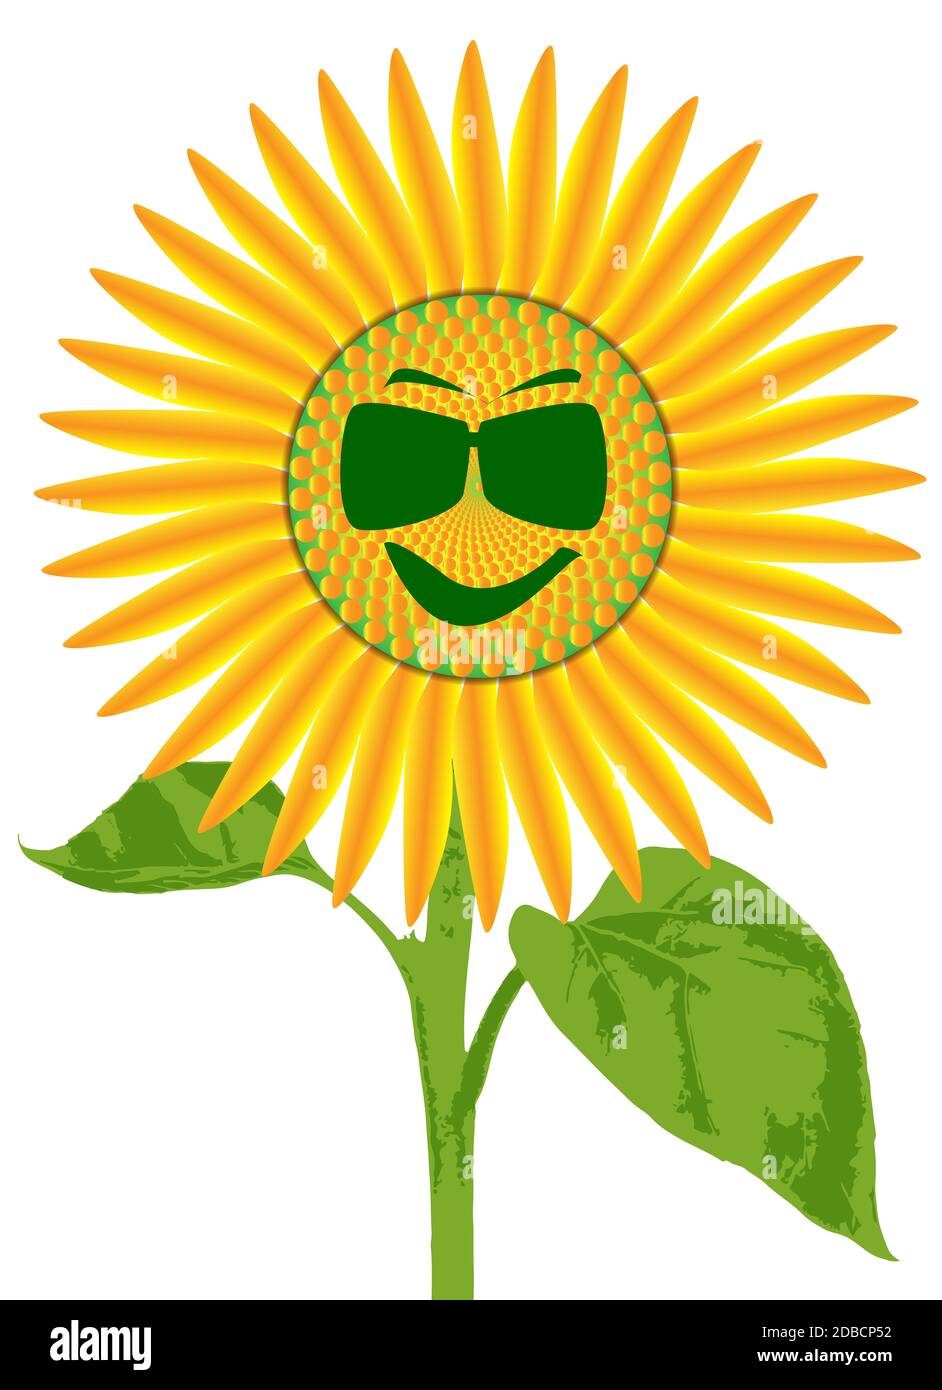 9,727 Smiley Face Flower Images, Stock Photos, 3D objects, & Vectors